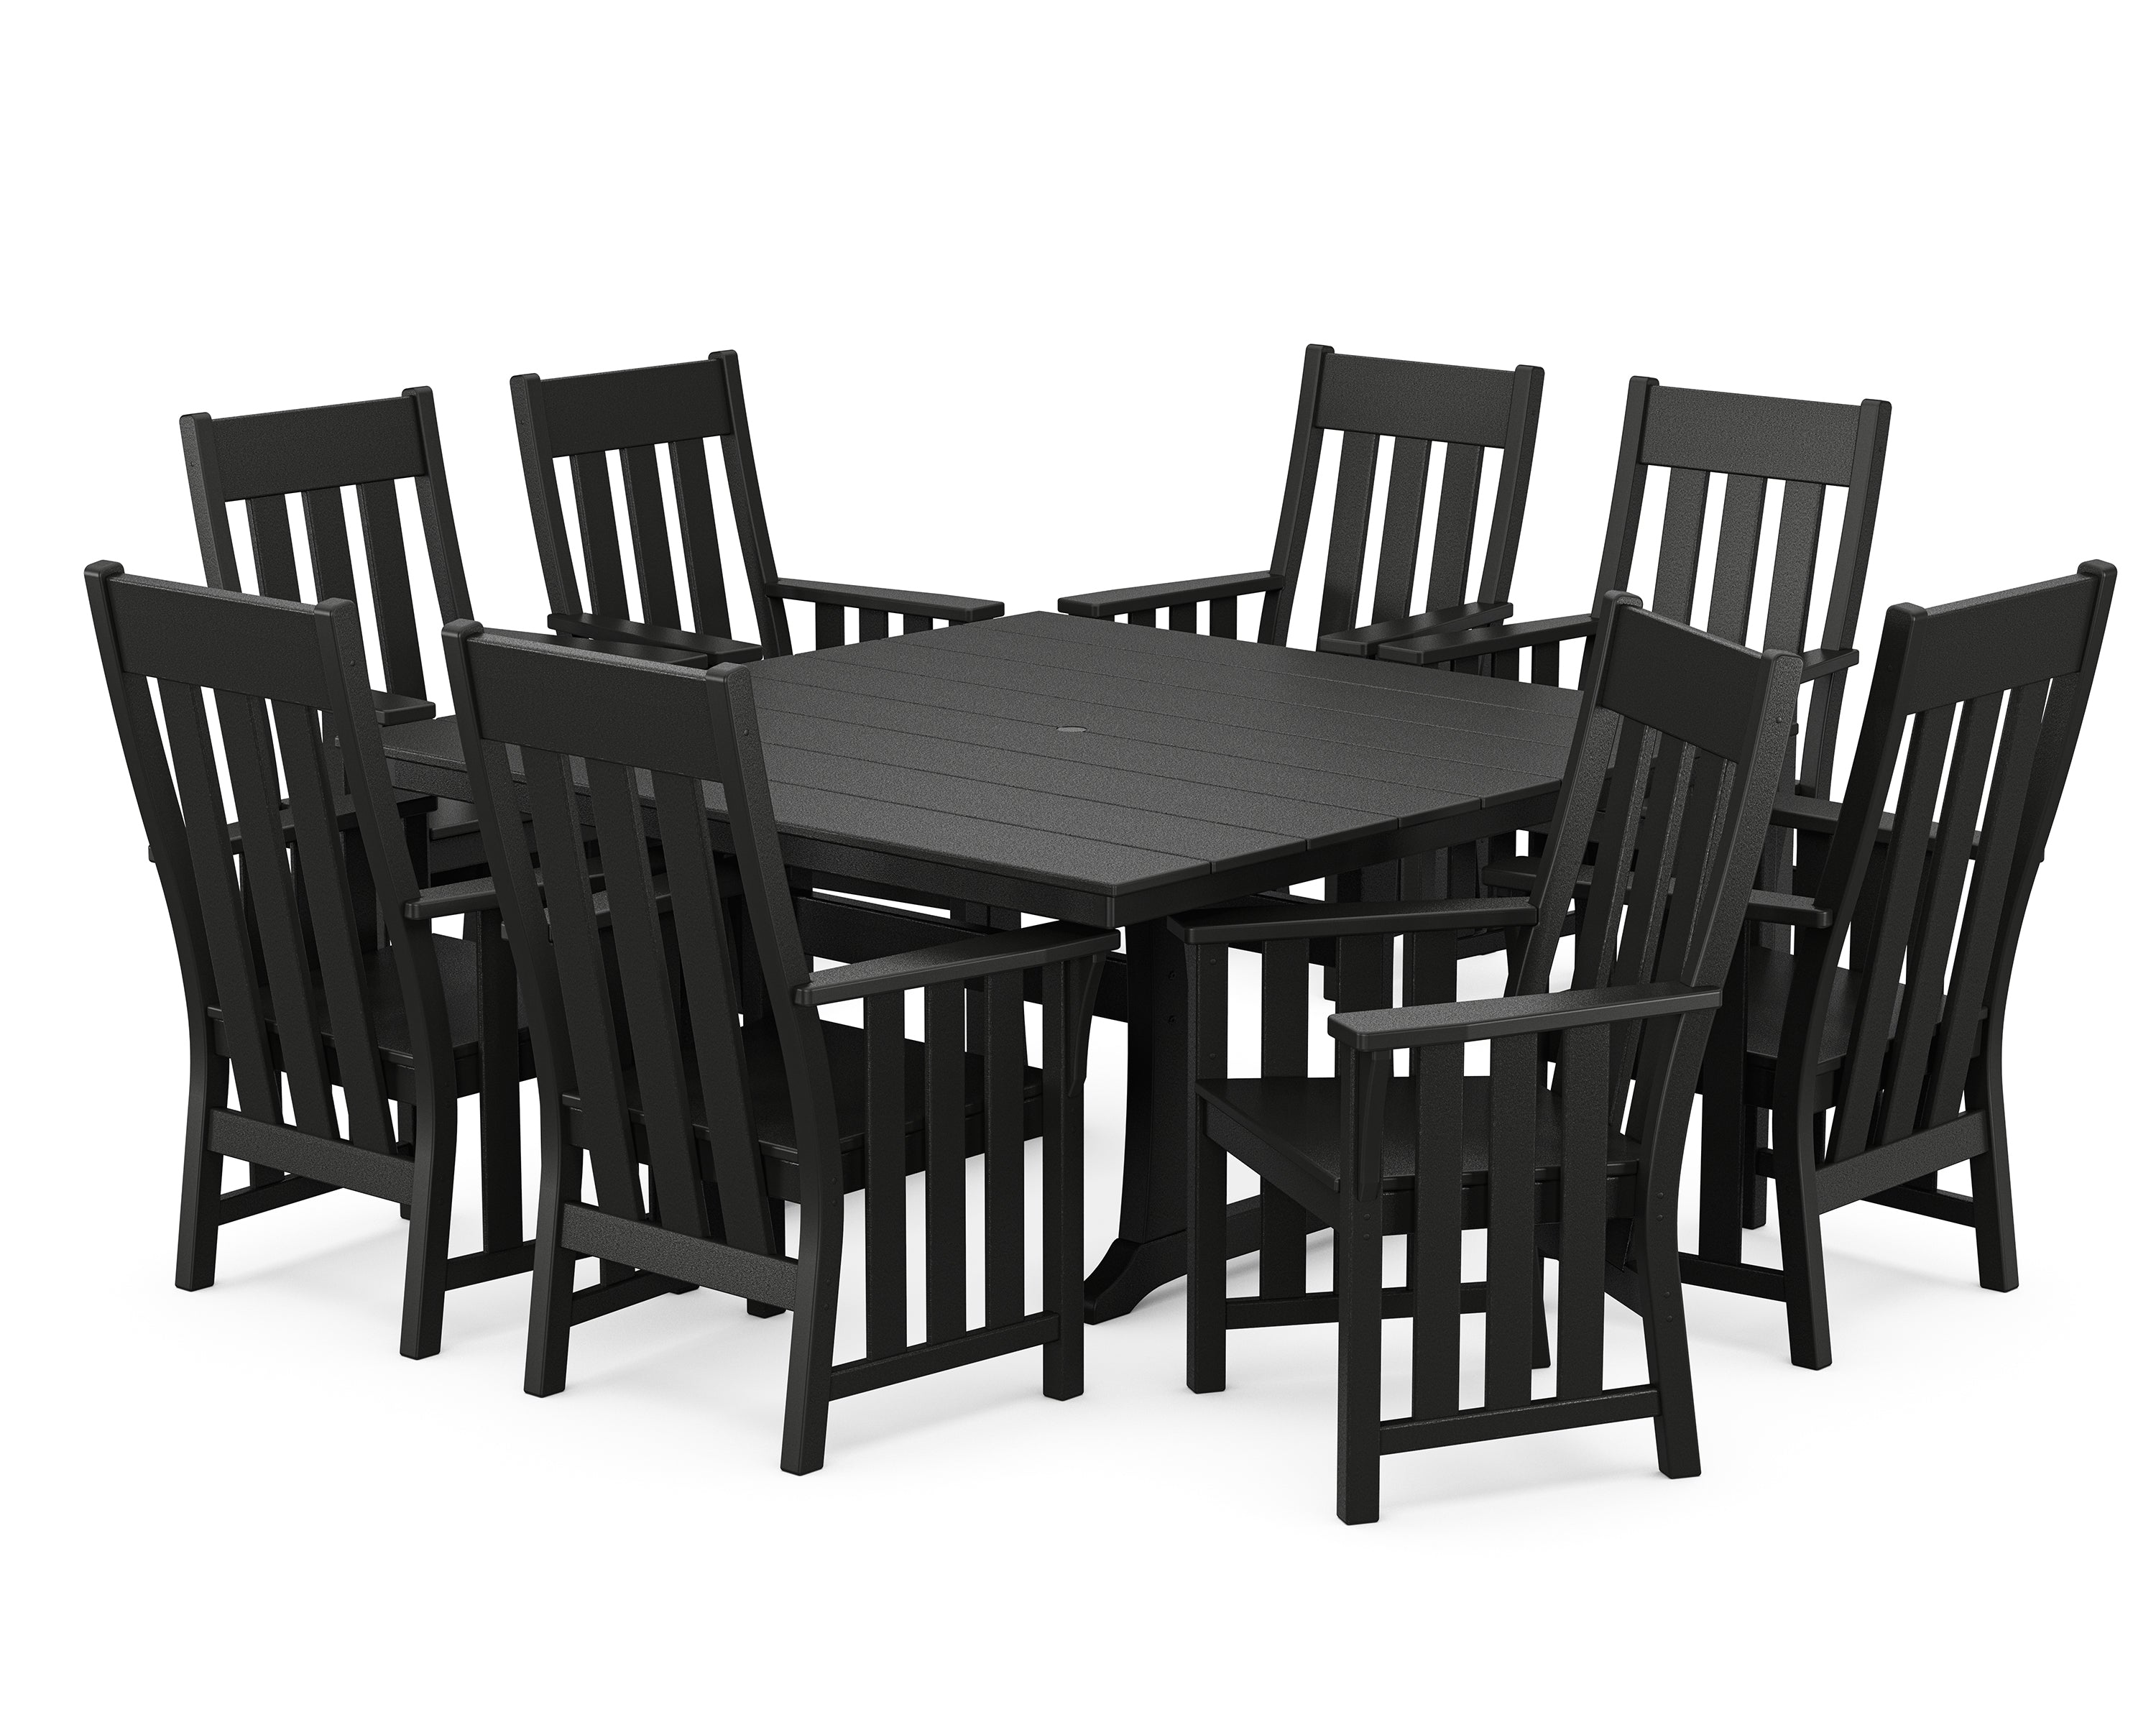 Martha Stewart by POLYWOOD® Acadia 9-Piece Square Farmhouse Dining Set with Trestle Legs in Black